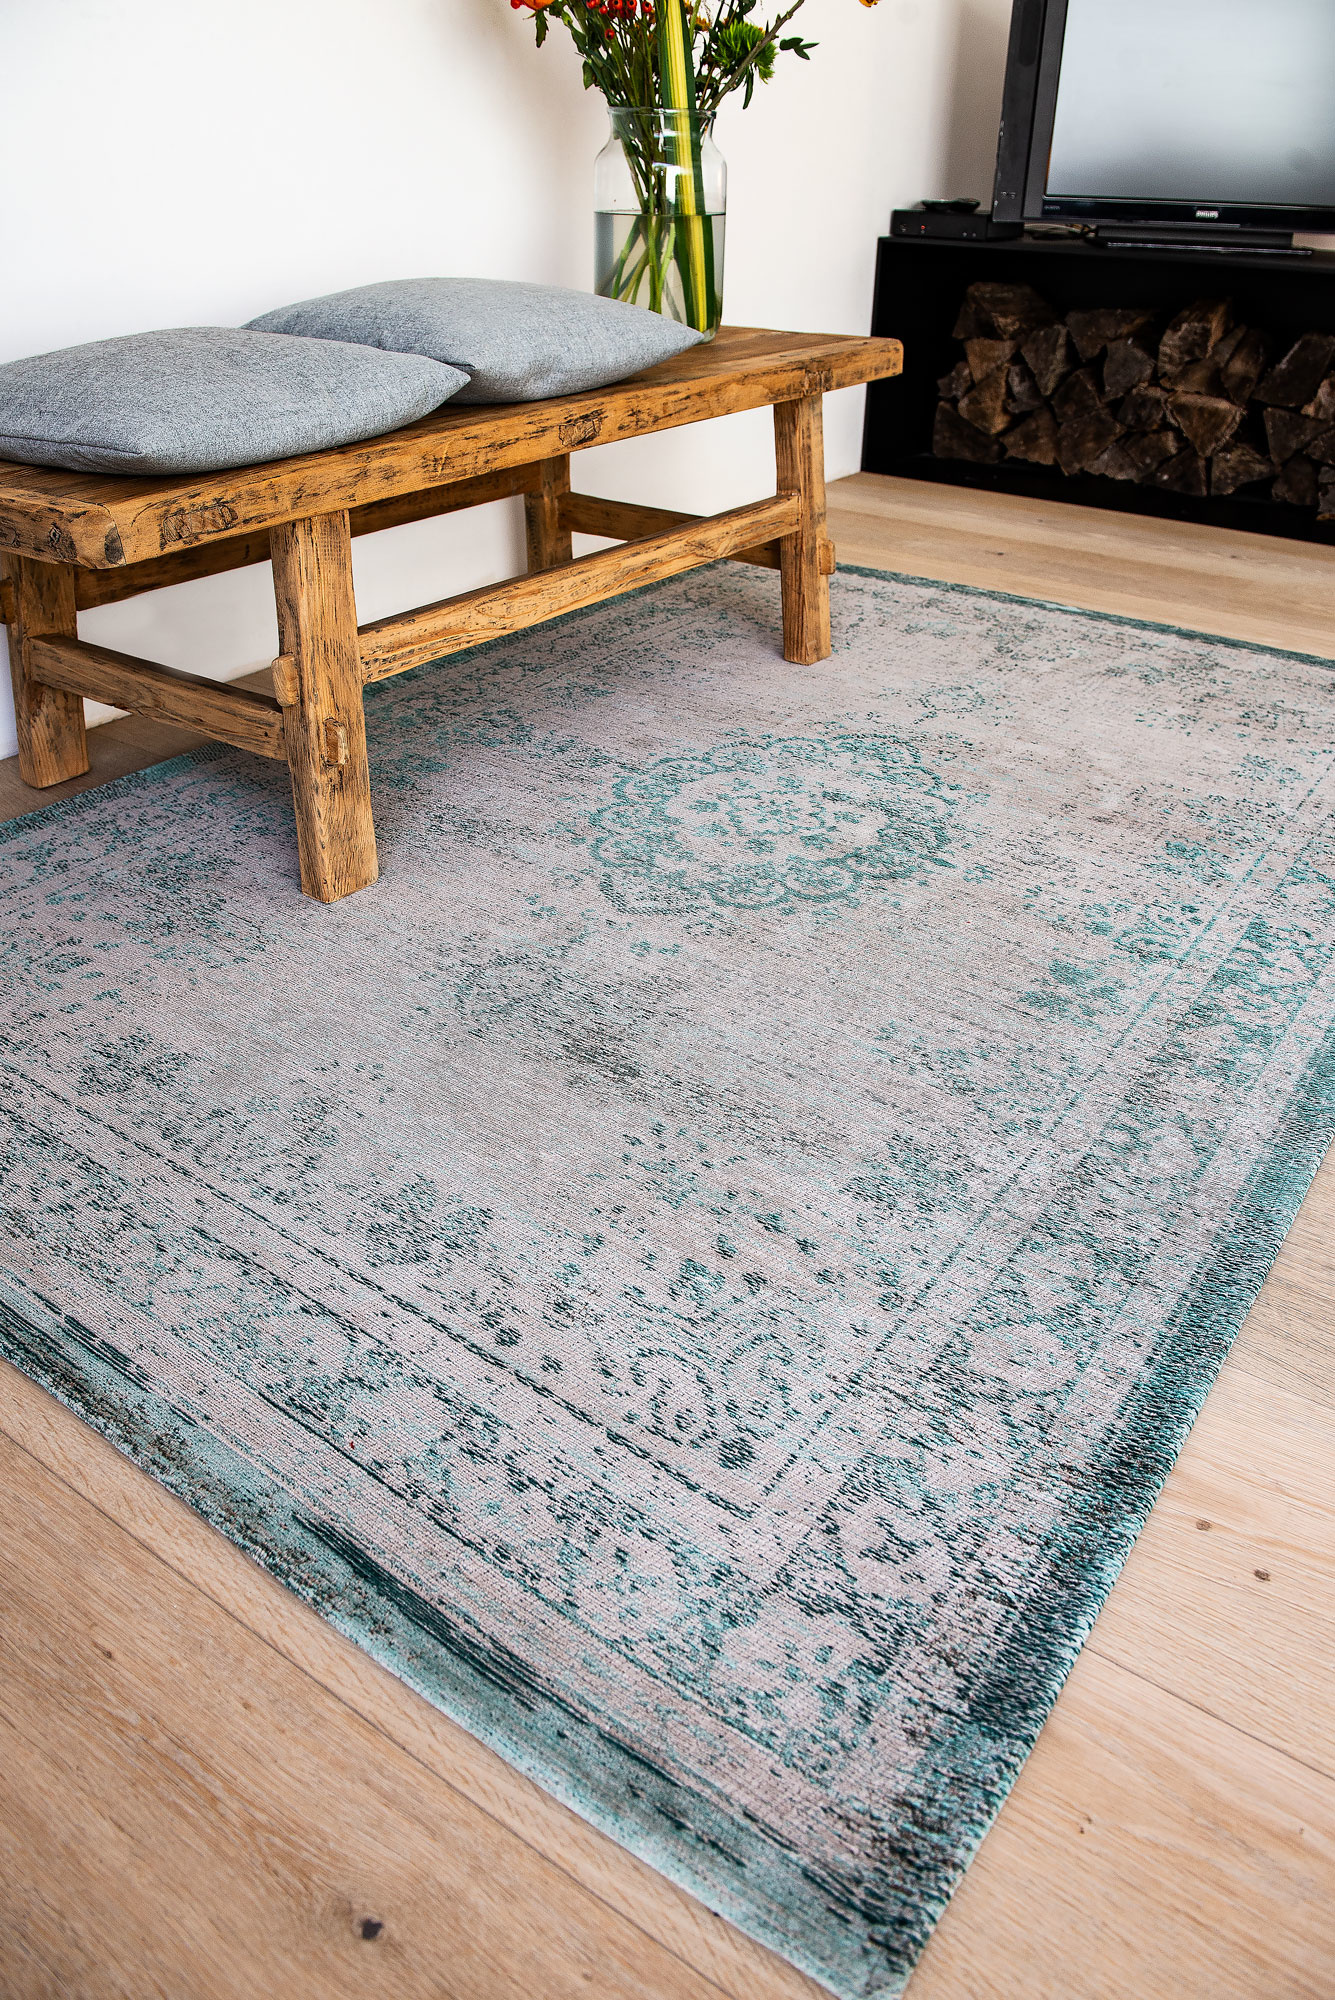 Medallion Turquoise Flatwoven Rug ☞ Size: 9' 2" x 13' (280 x 390 cm)